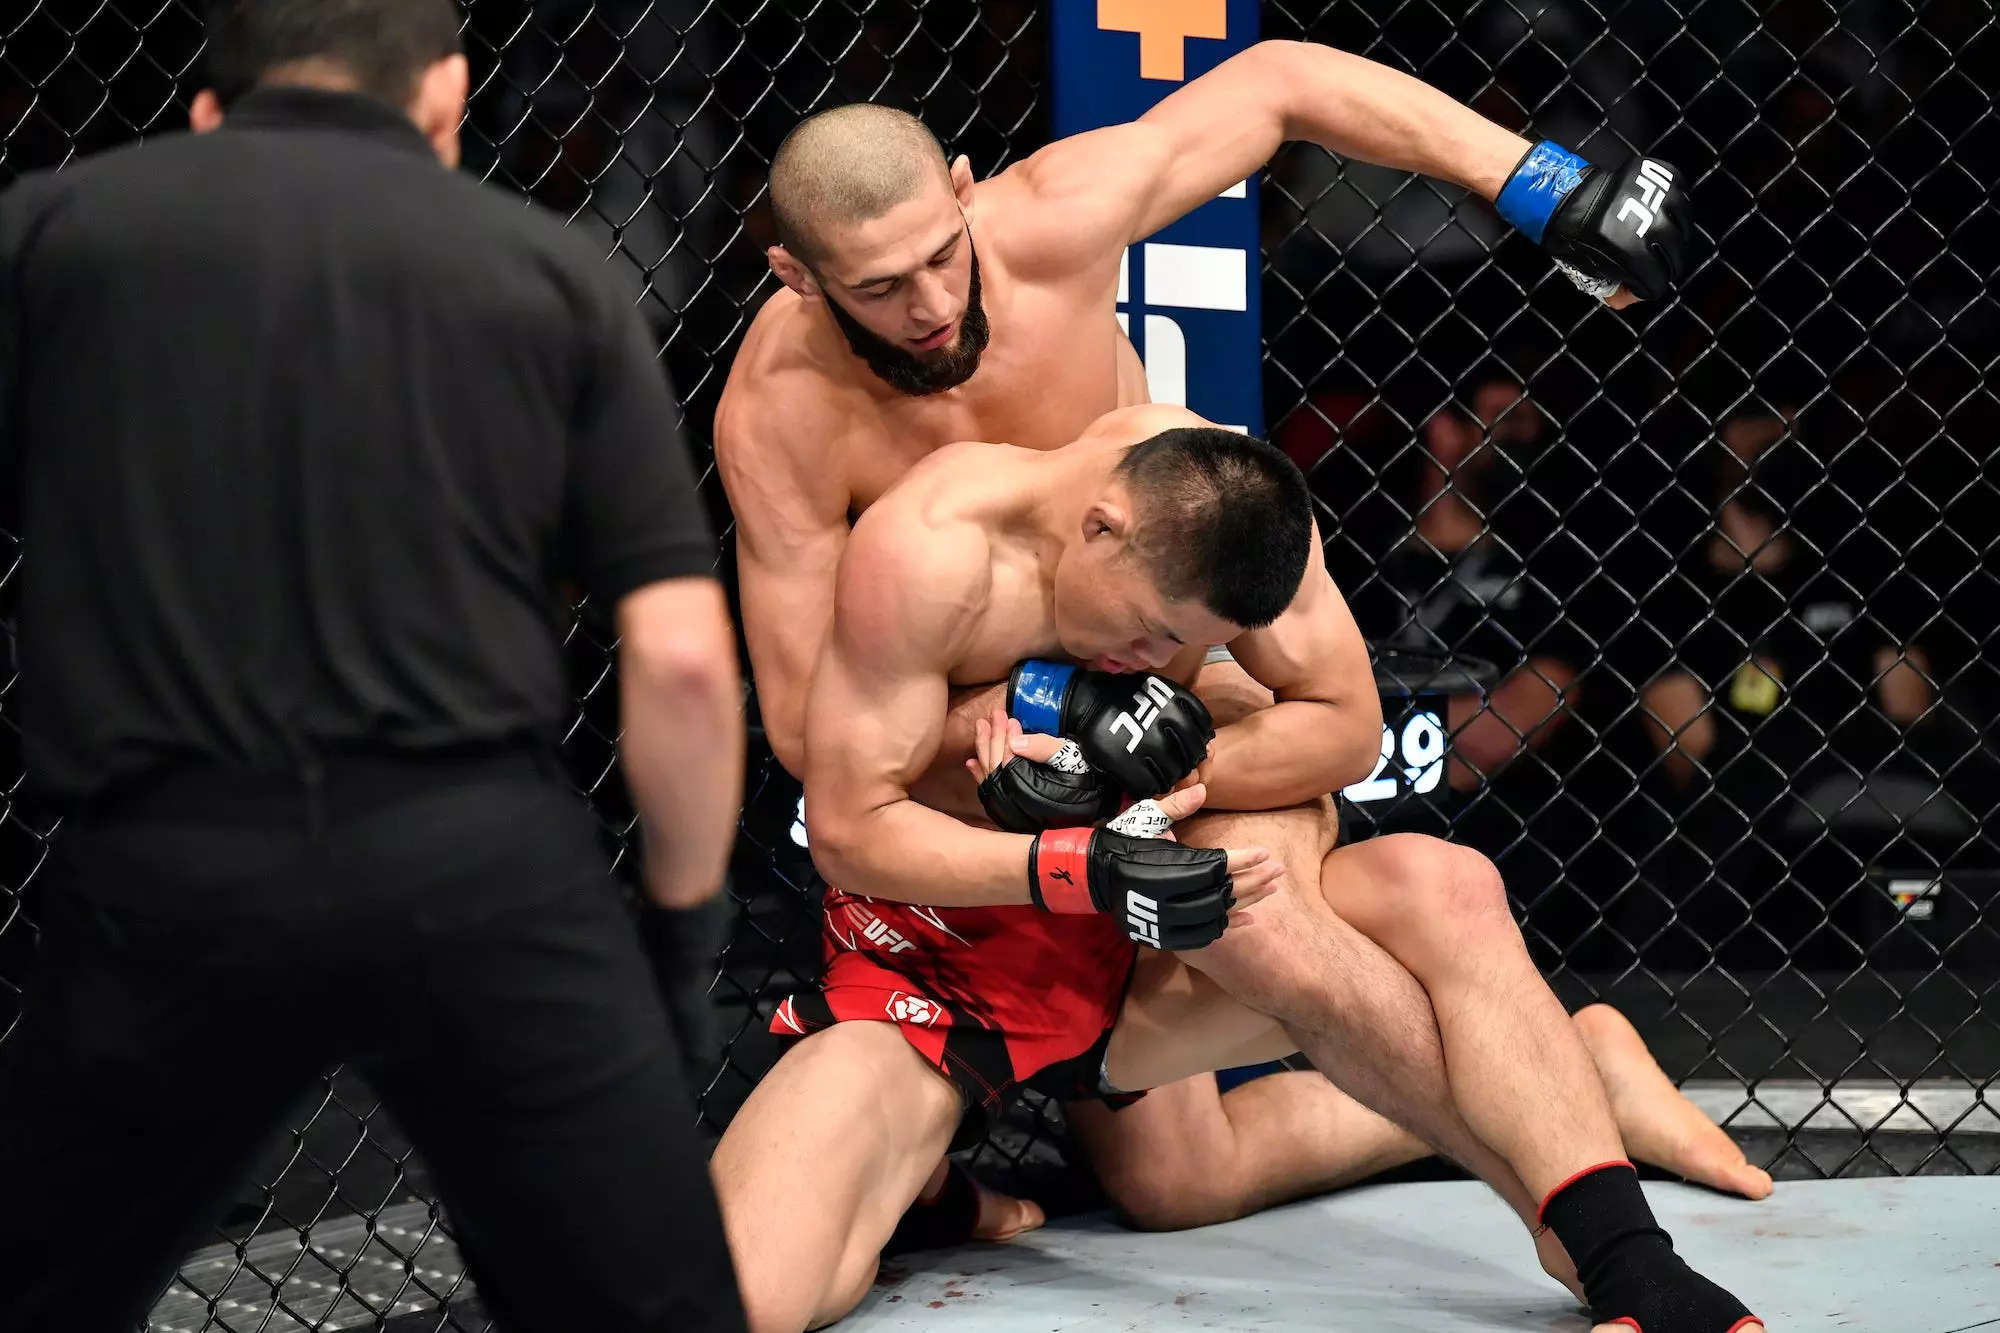 Ultimate gangster Khamzat Chimaev choked opponent Li Jingliang unconscious in UFC performance for the ages Business Insider India